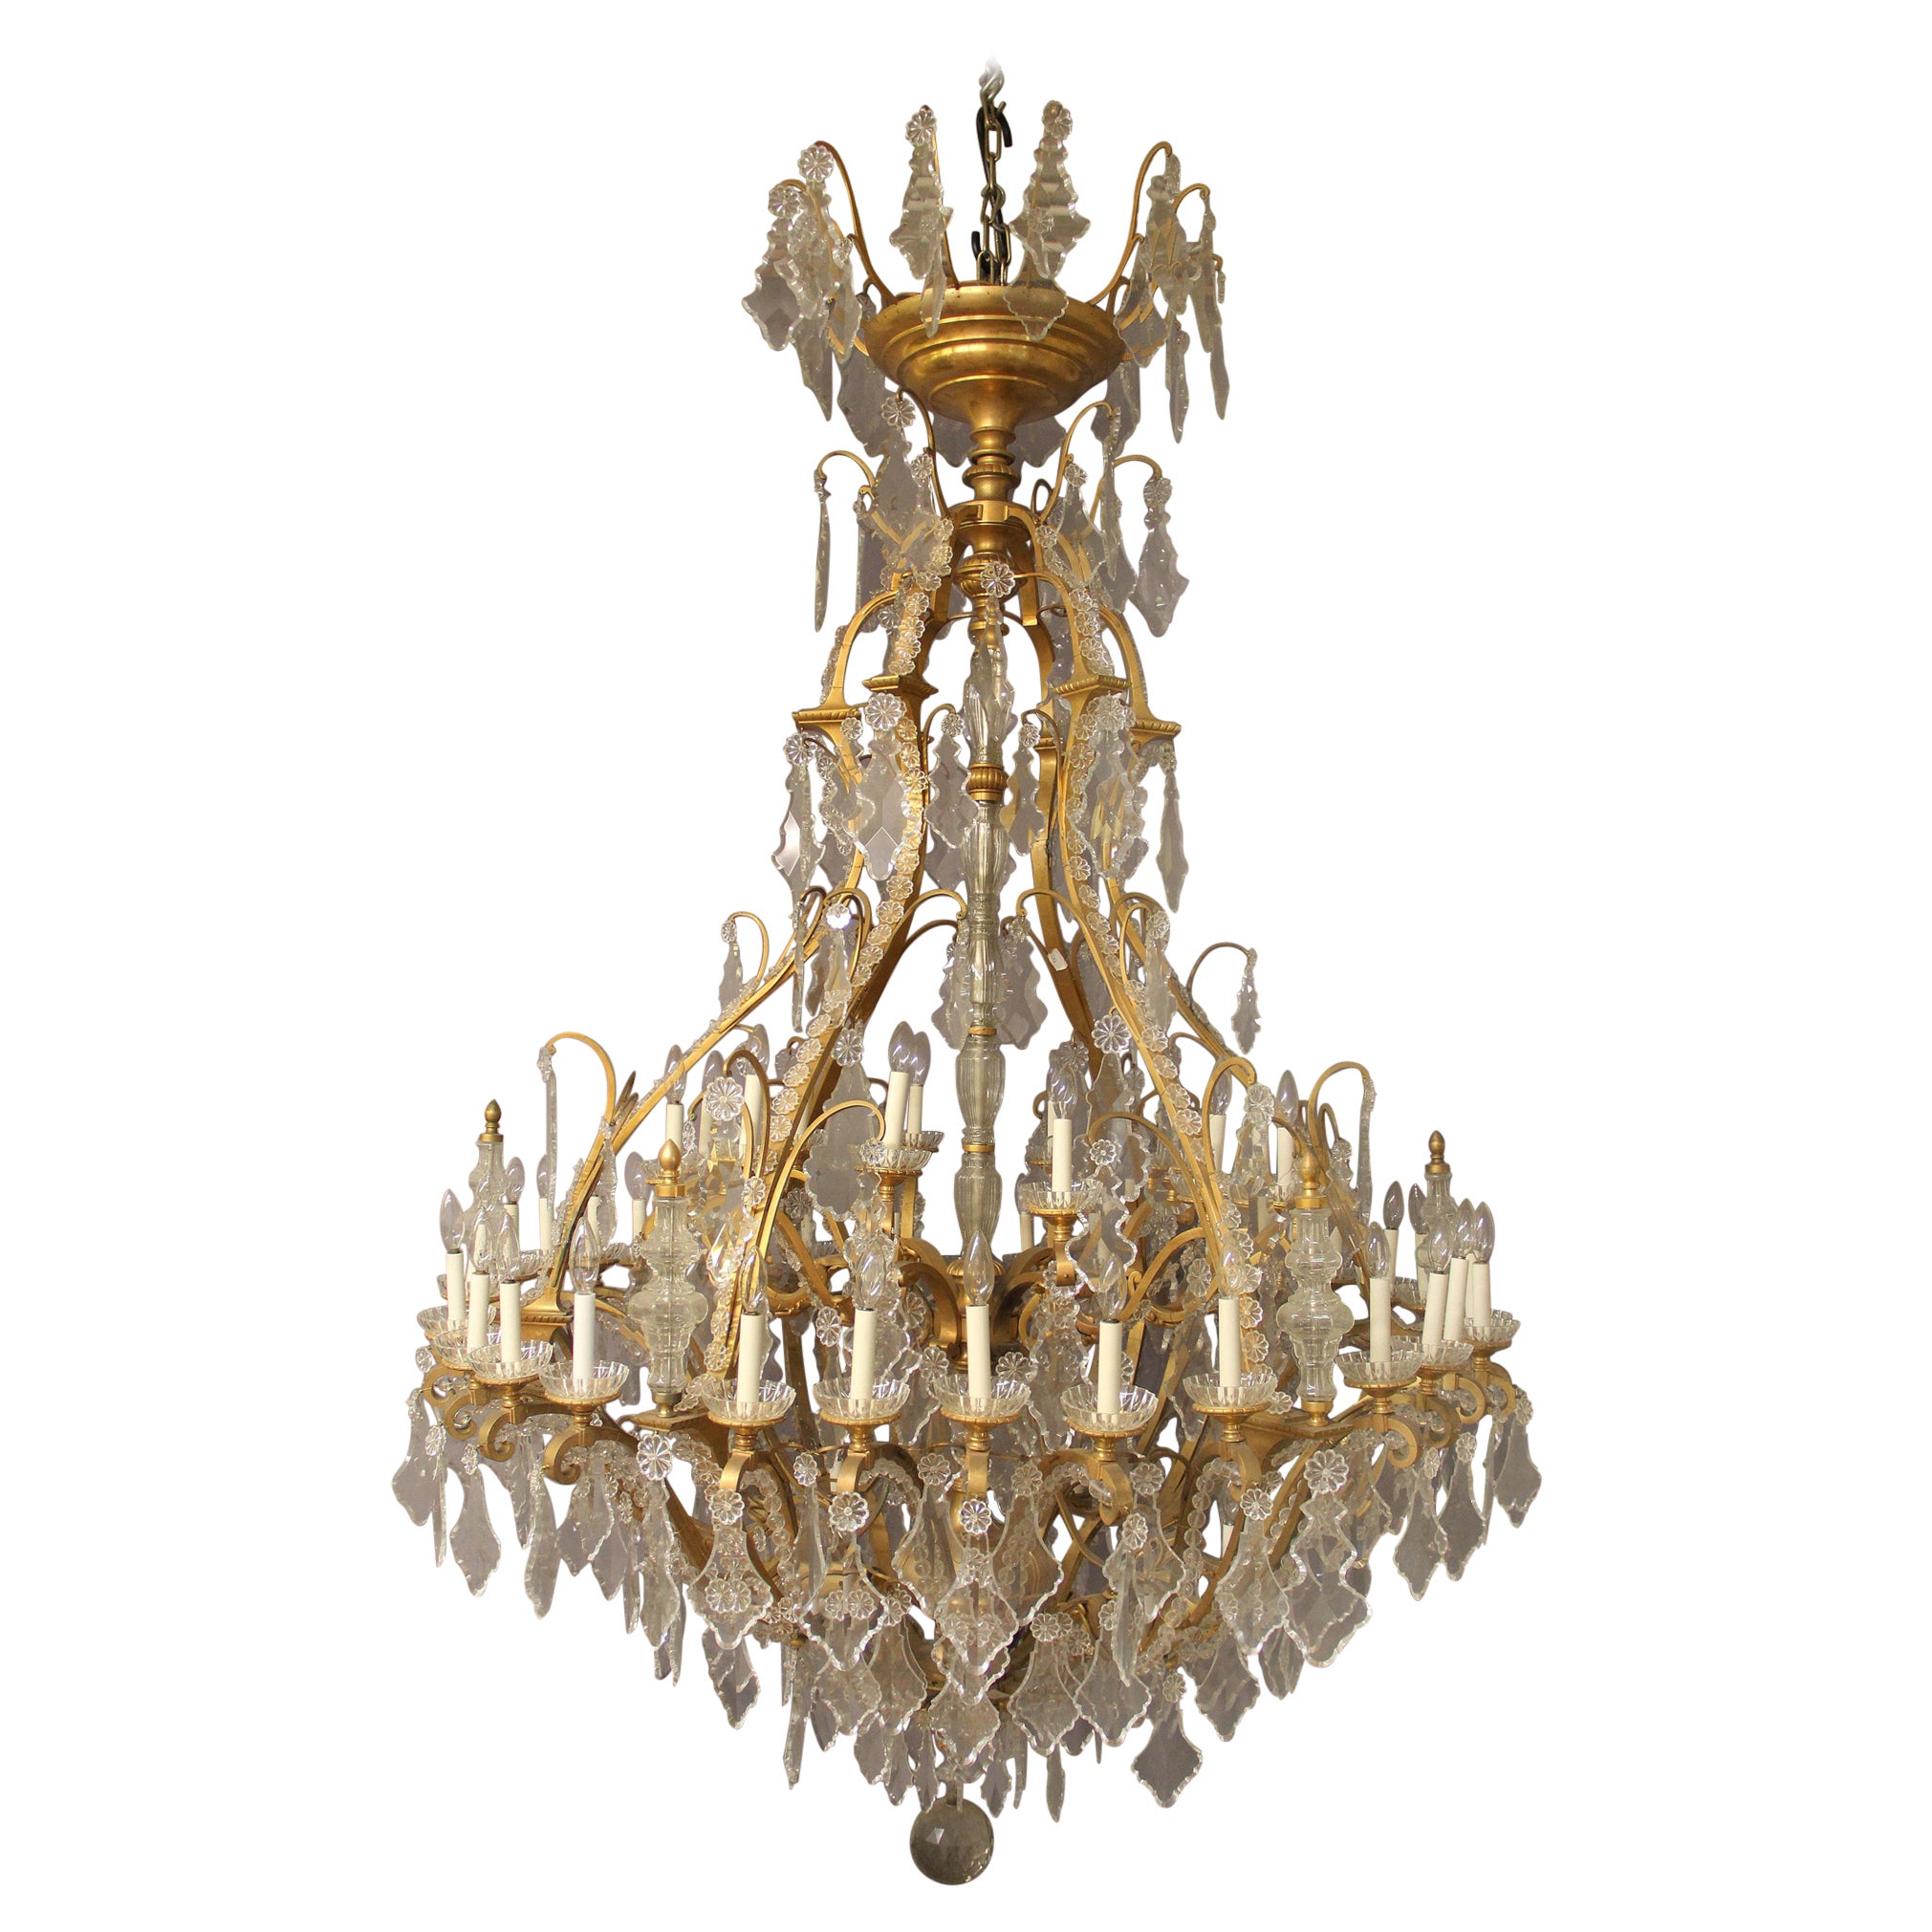 Impressive and Palatial 19th Century Gilt Bronze and Crystal 48 Light Chandelier For Sale